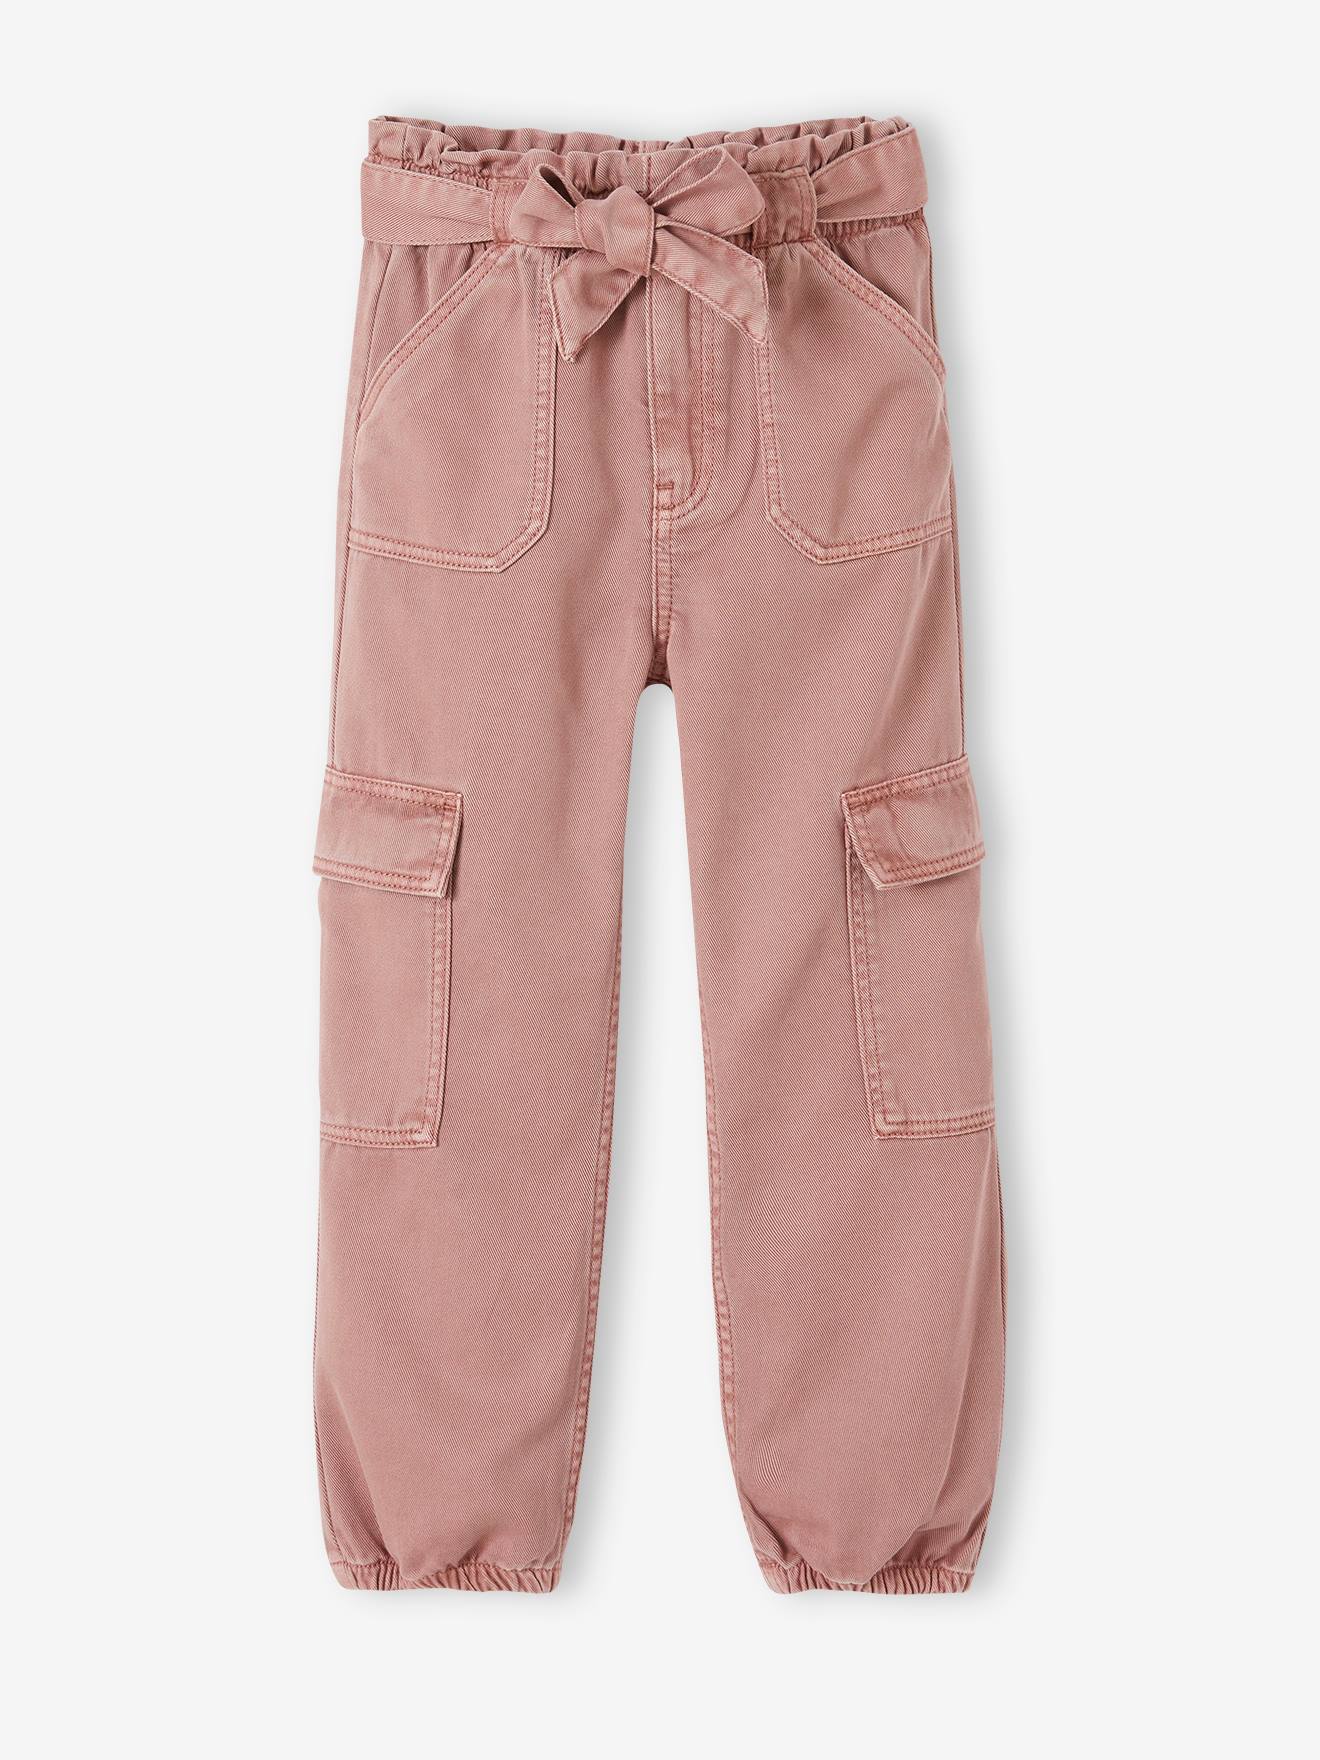 Cargo Trousers for Girls in Loose-Fitting Fabric - old rose, Girls